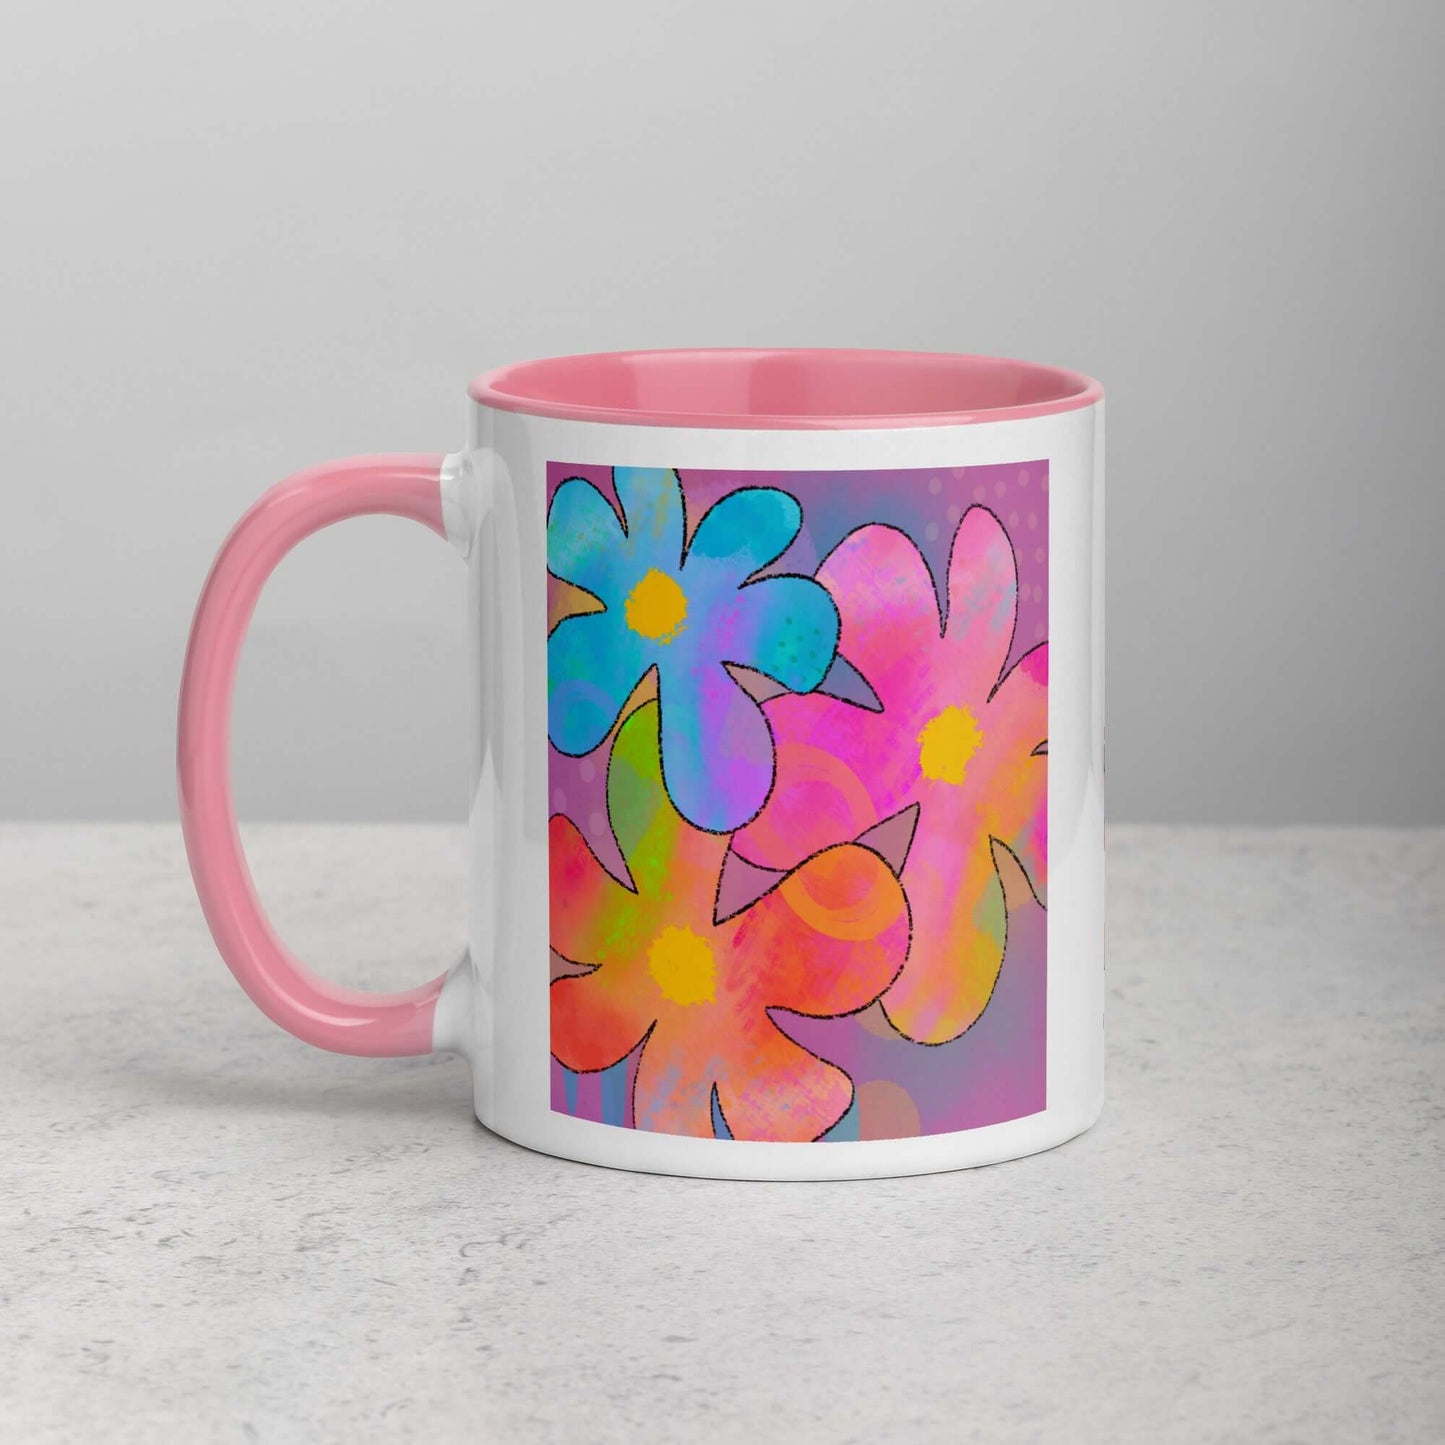 Big Colorful 1960s Psychedelic “Hippie Flowers” Mug with Light Pink Color Inside Left Handed Front View